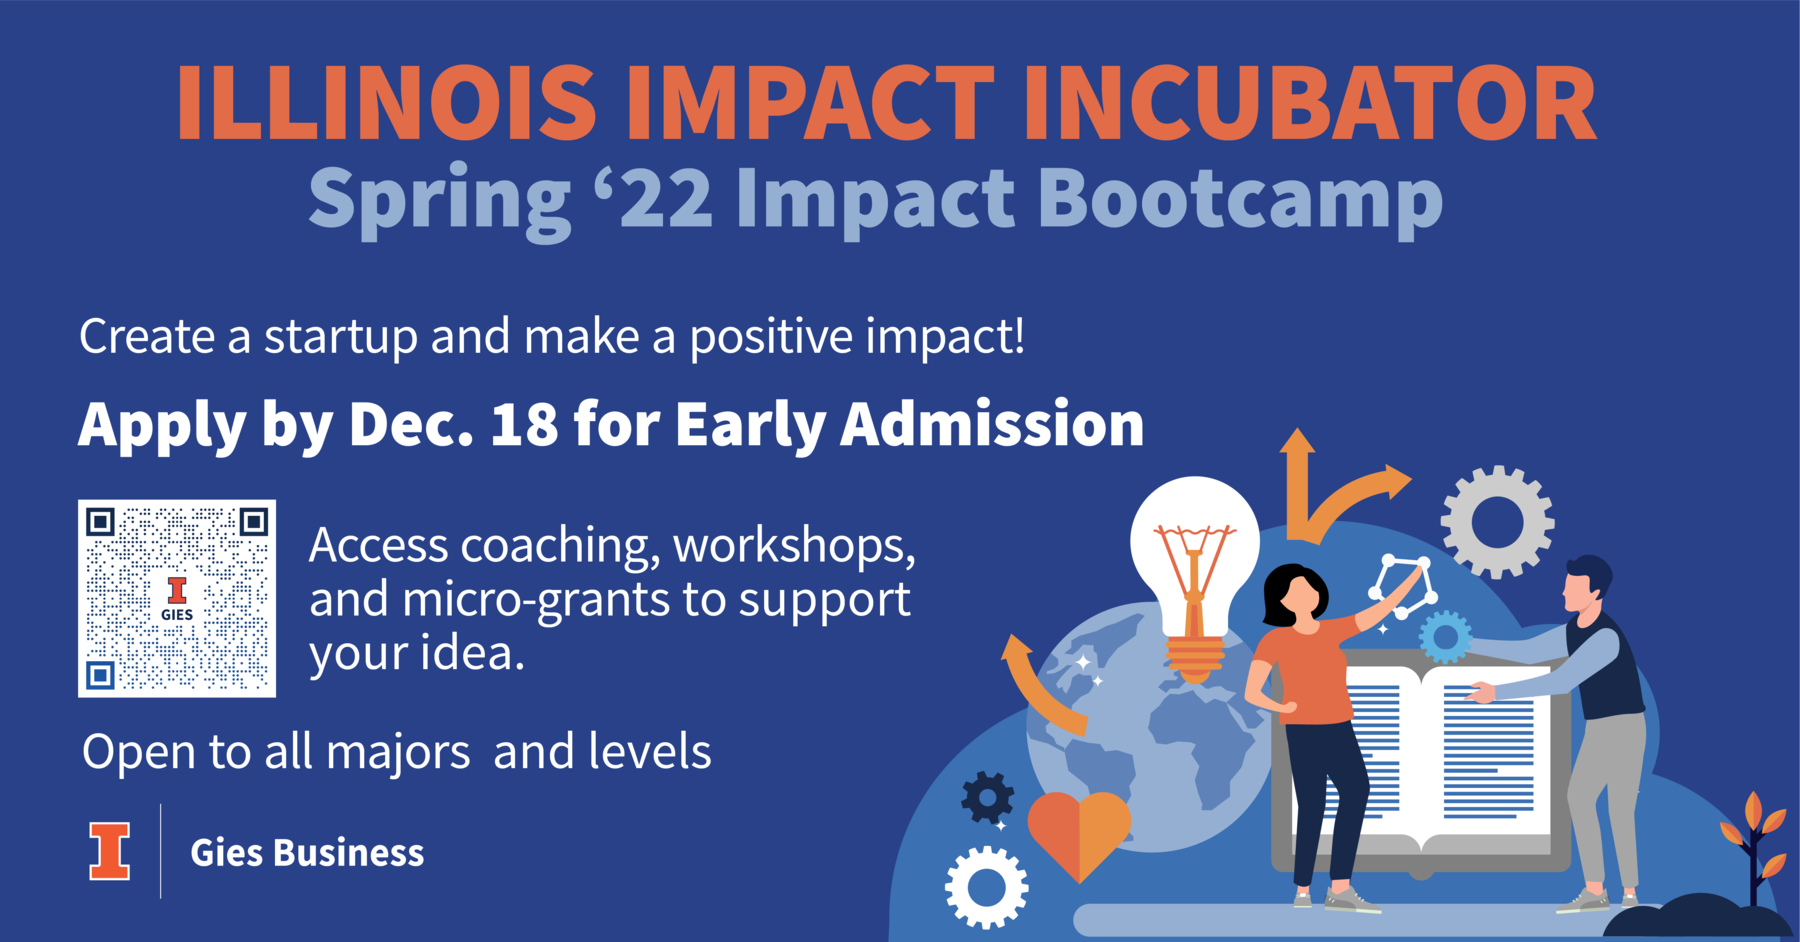 Spring 2022 Applications Open for Illinois Impact Incubator